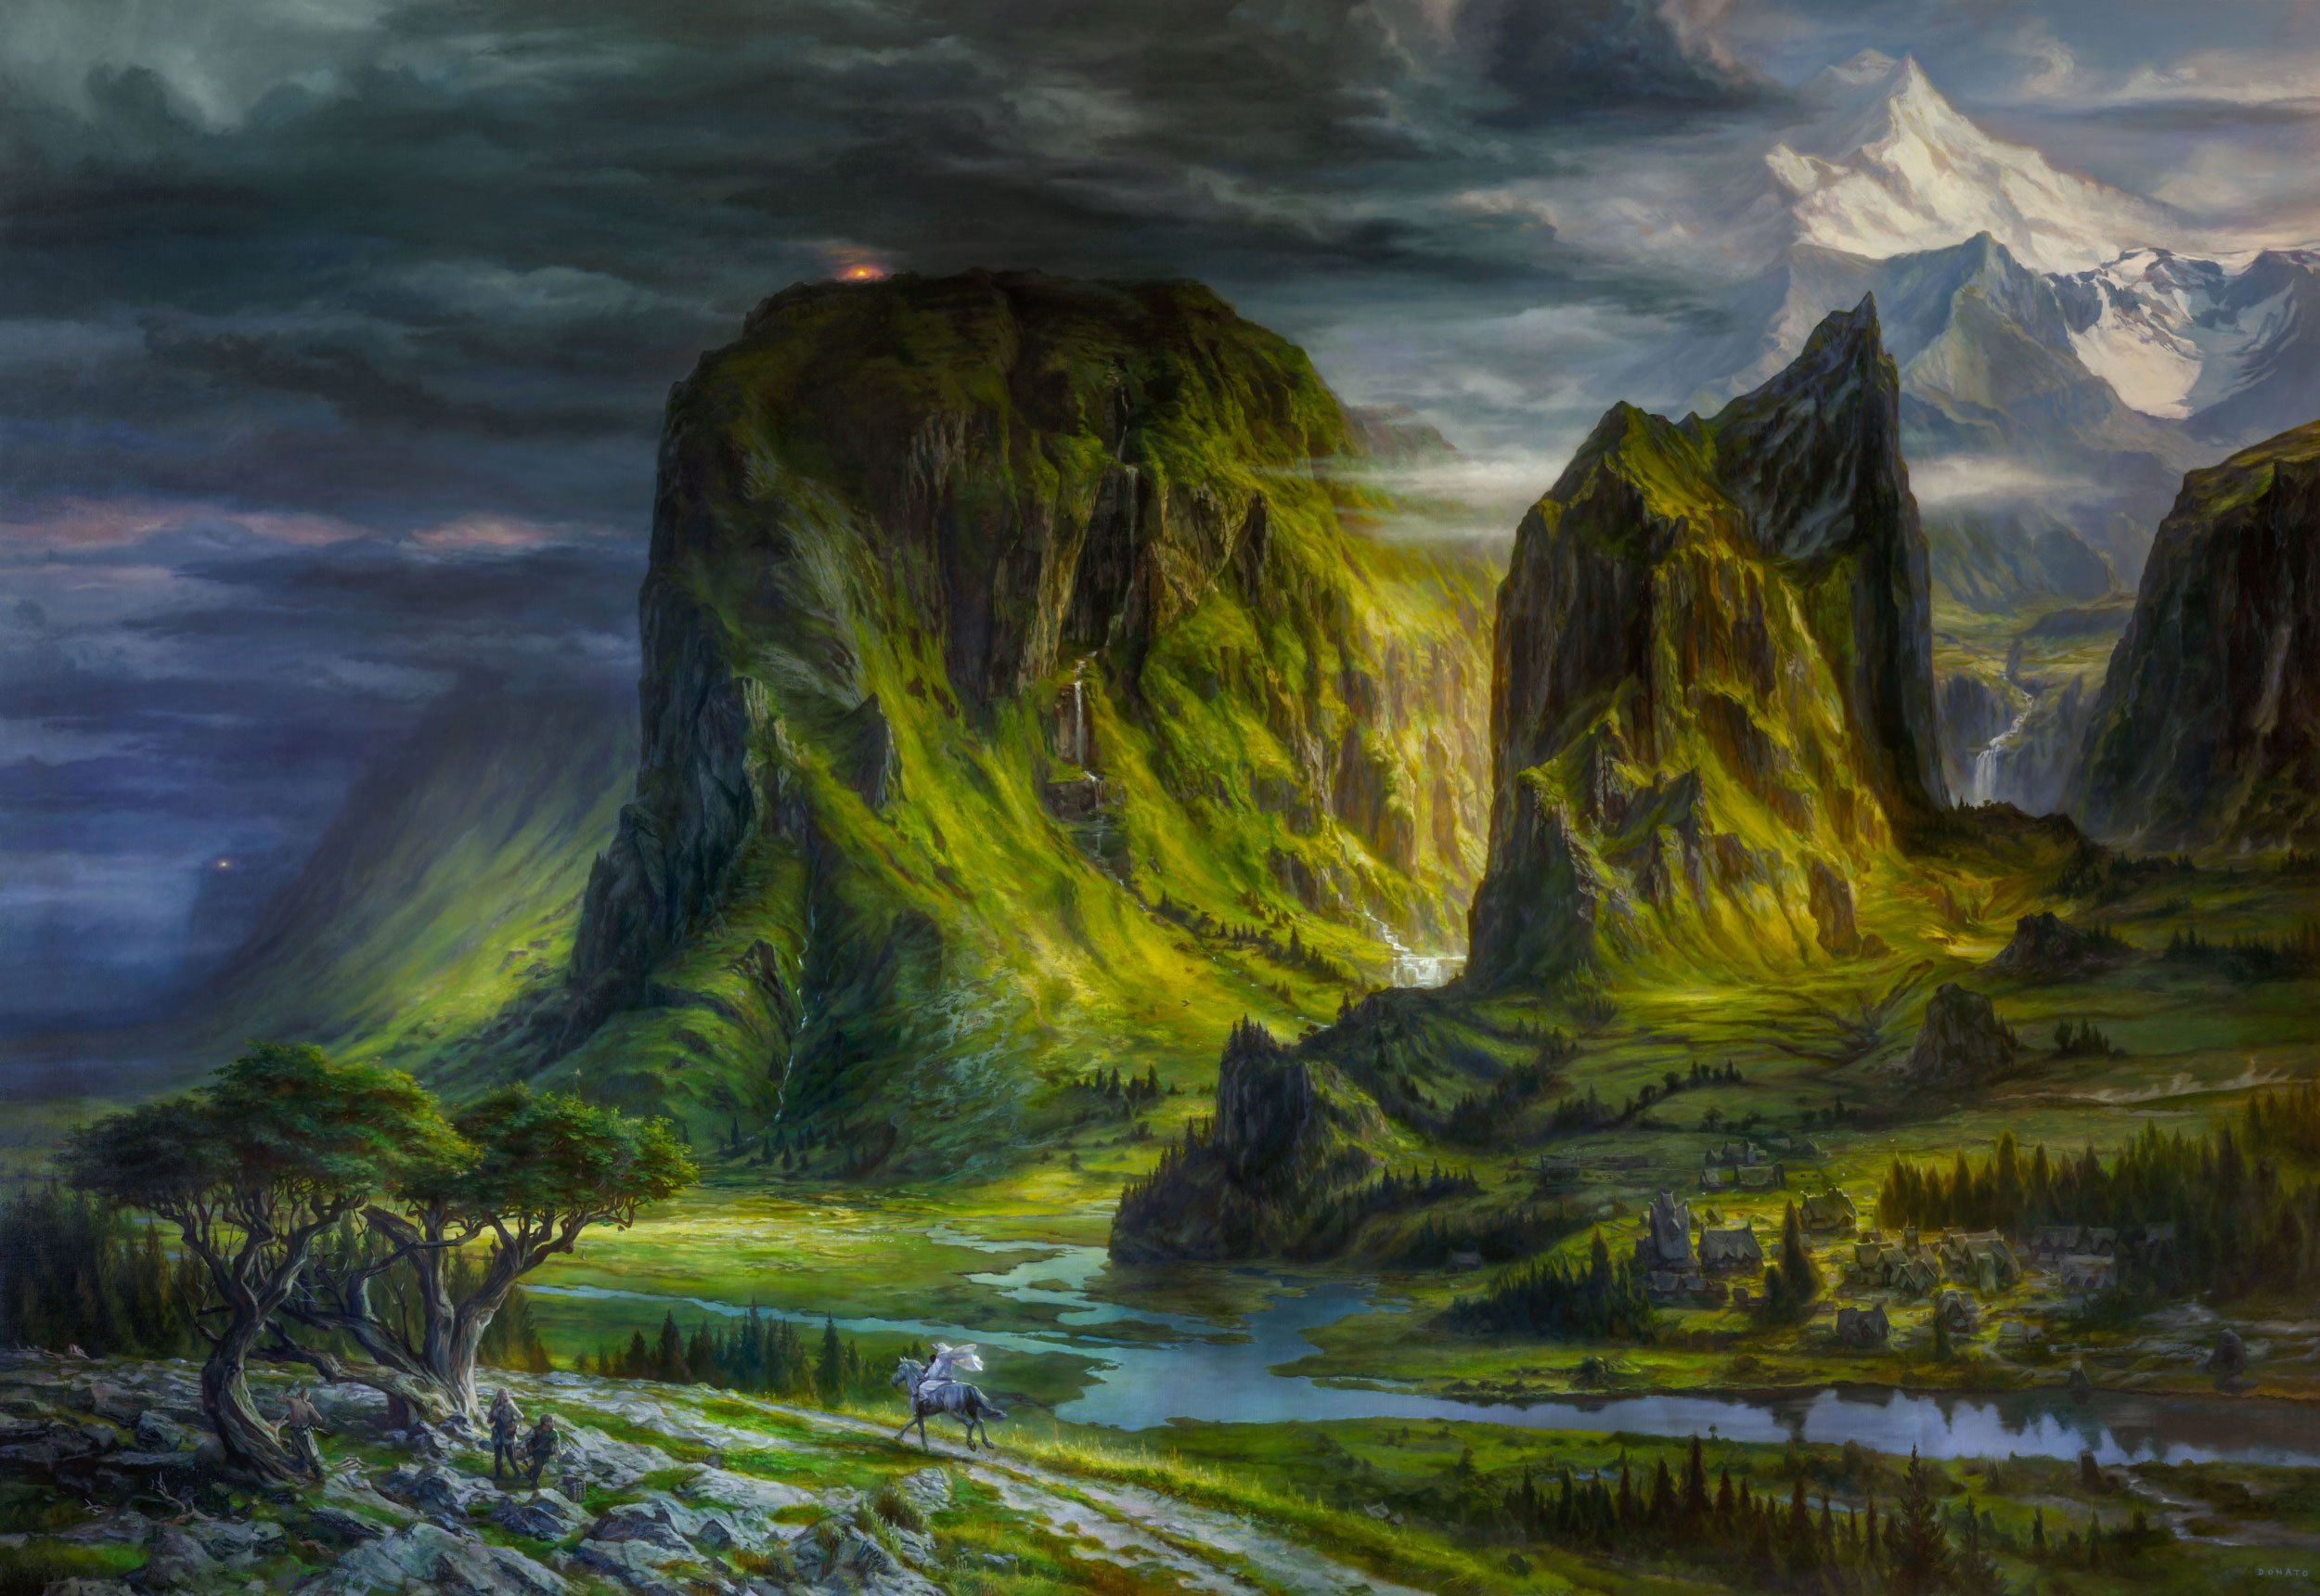 The Beacons of Gondor
77" x 114"  Oil on Linen 2022
Illustration for The Lord of the Rings by J.R.R. Tolkien